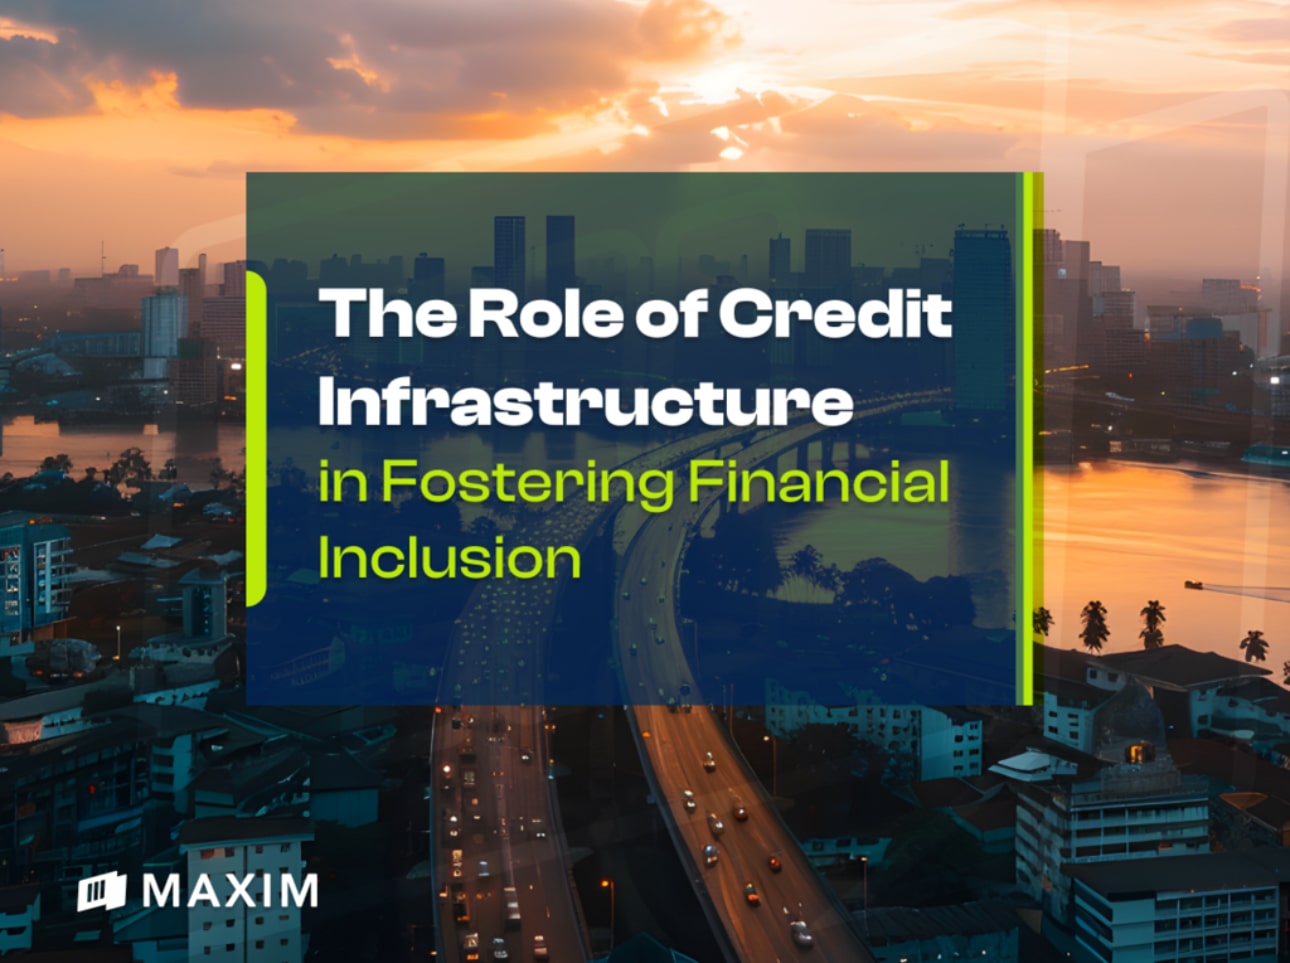 The Role of Credit Infrastructure in Fostering Financial Inclusion